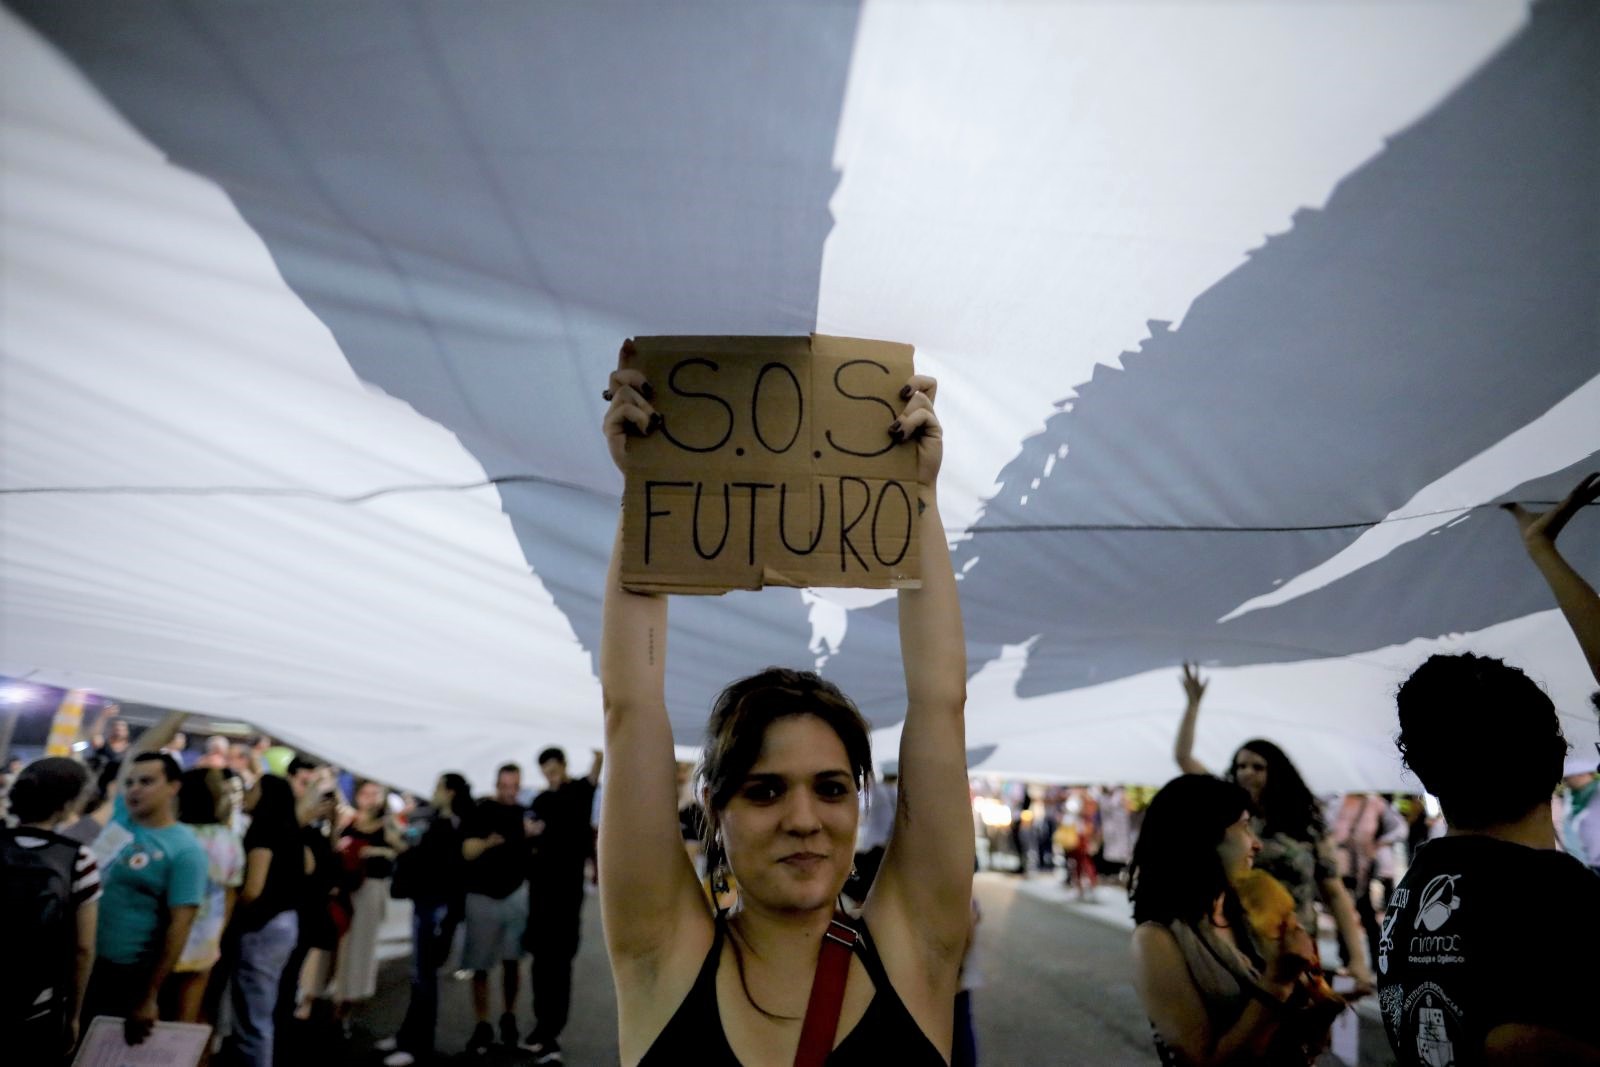 Young people want to have an impact on politics: Fridays for Future rally in São Paulo.